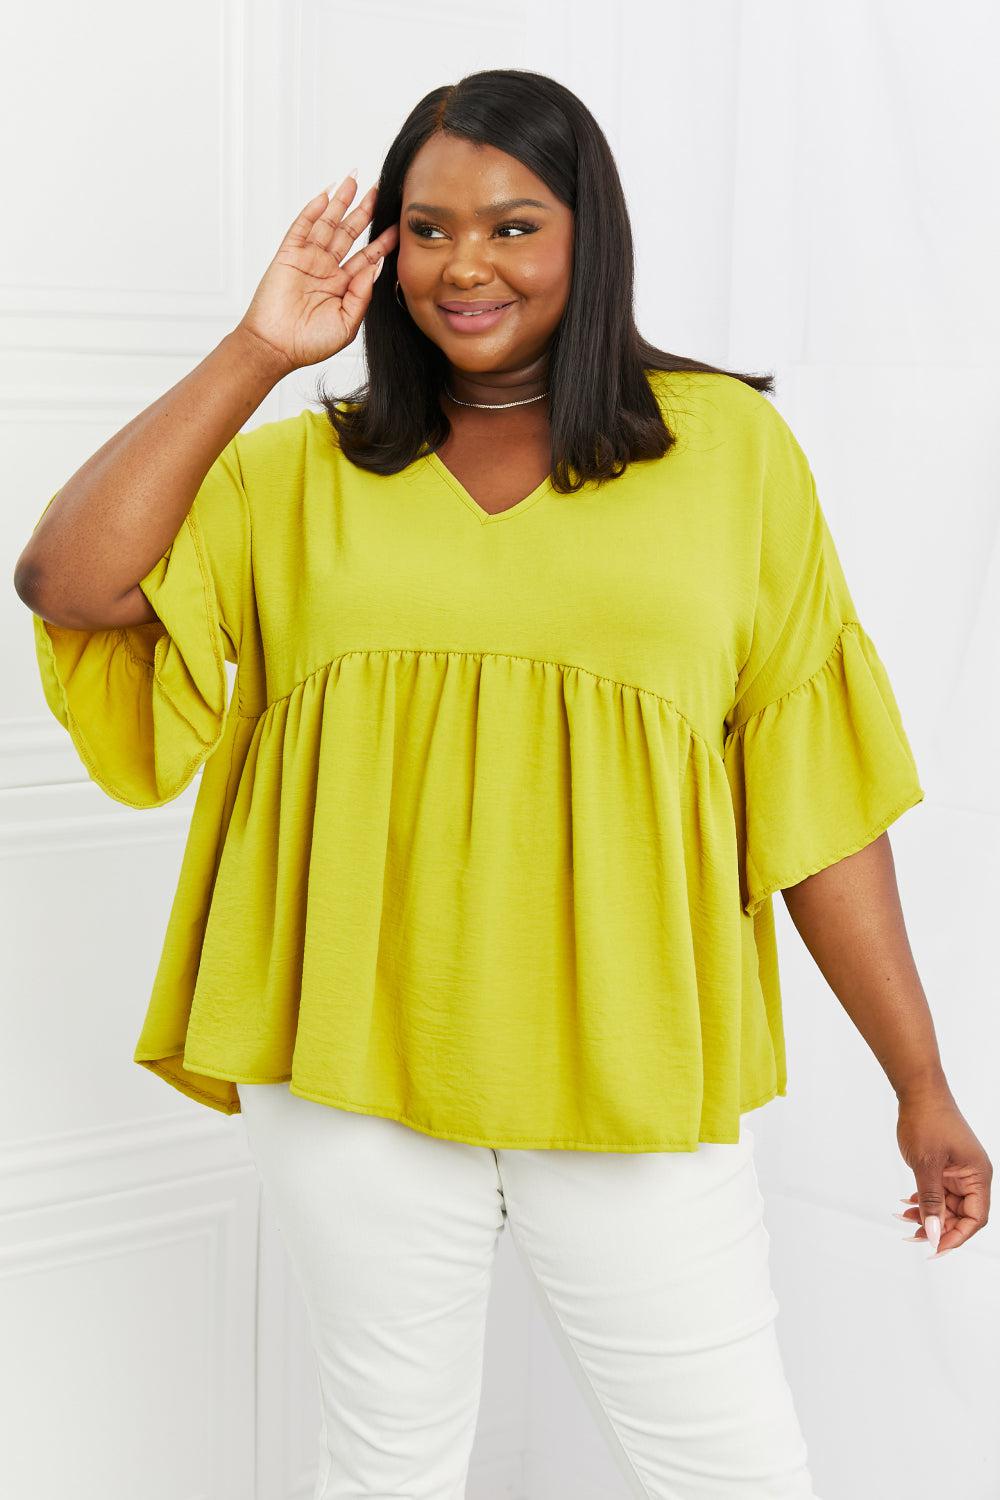 Blue Zone Planet |  Celeste Look At Me Full Size Flowy Ruffle Sleeve Top in Lime BLUE ZONE PLANET